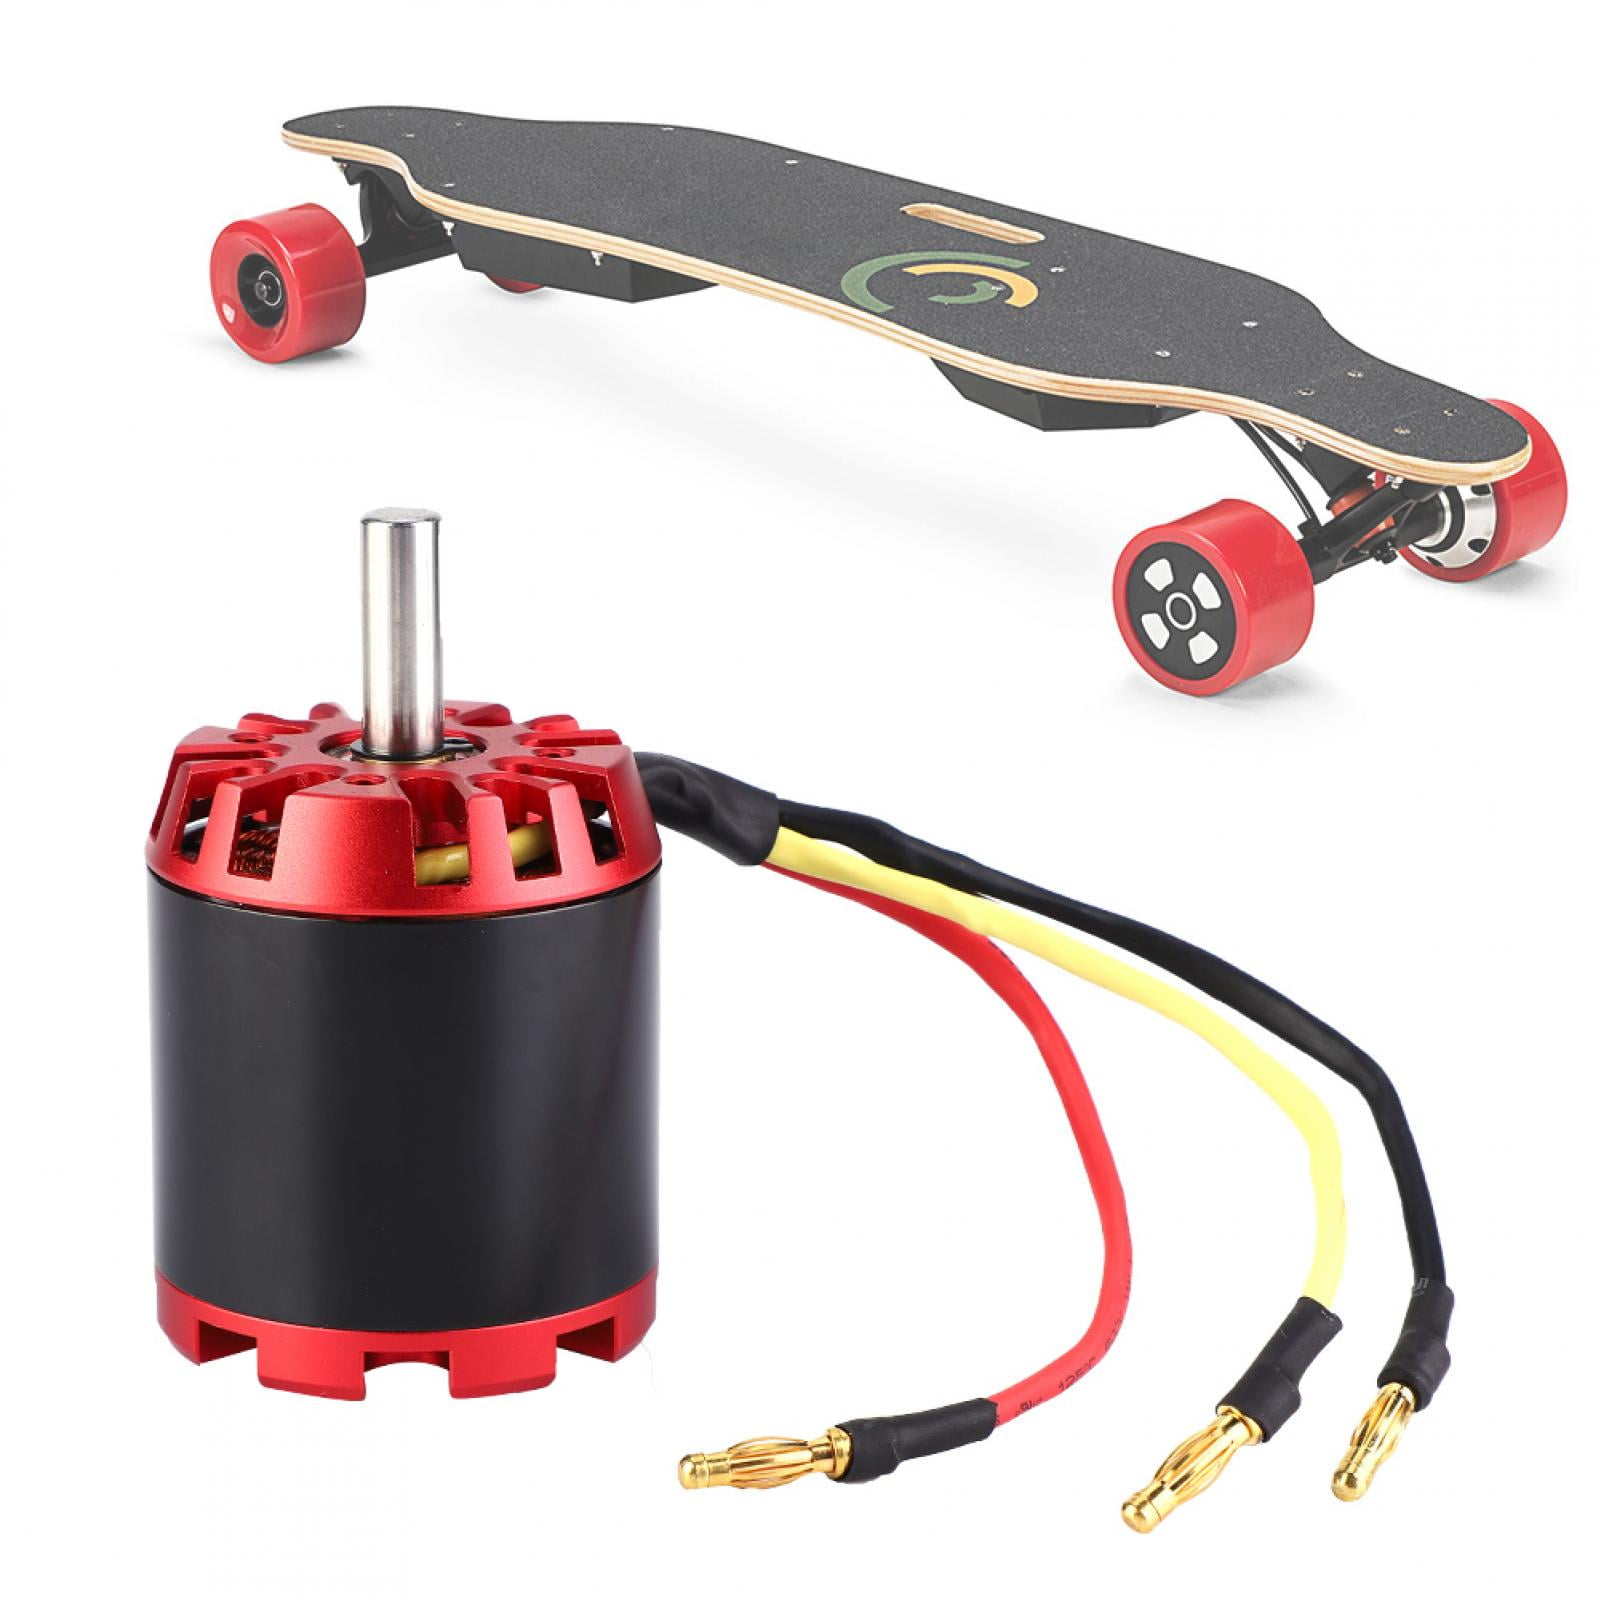 klant Droogte Riet DOACT Electric Scooter Motor, Electric Skateboard Hub Motor, Strong Power  Skateboard For Electric Skateboard Electric Longboard Electric Scooter -  Walmart.com